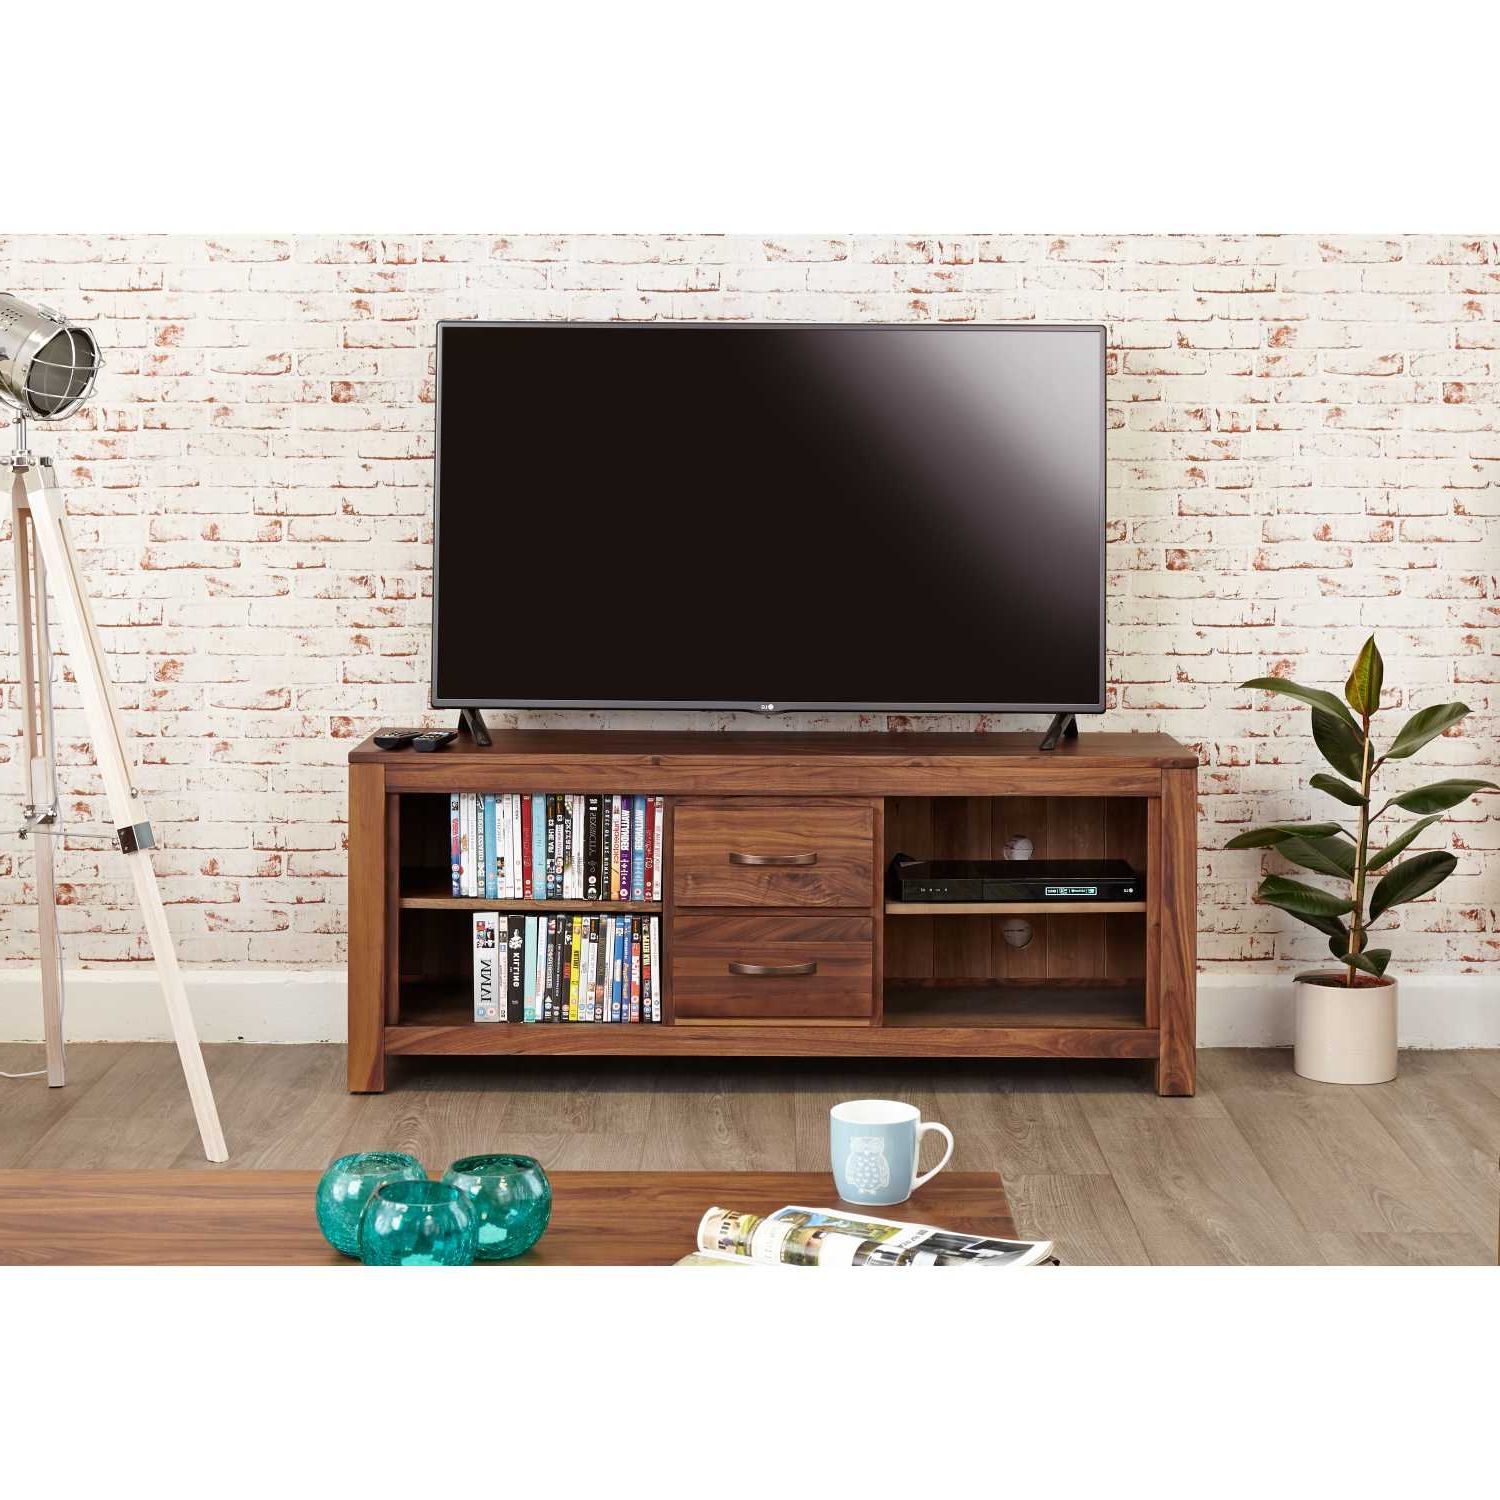 Solid Walnut Widescreen Television Cabinet Tv Media Unit With Regard To Tv Stands With 2 Open Shelves 2 Drawers High Gloss Tv Unis (Gallery 7 of 20)